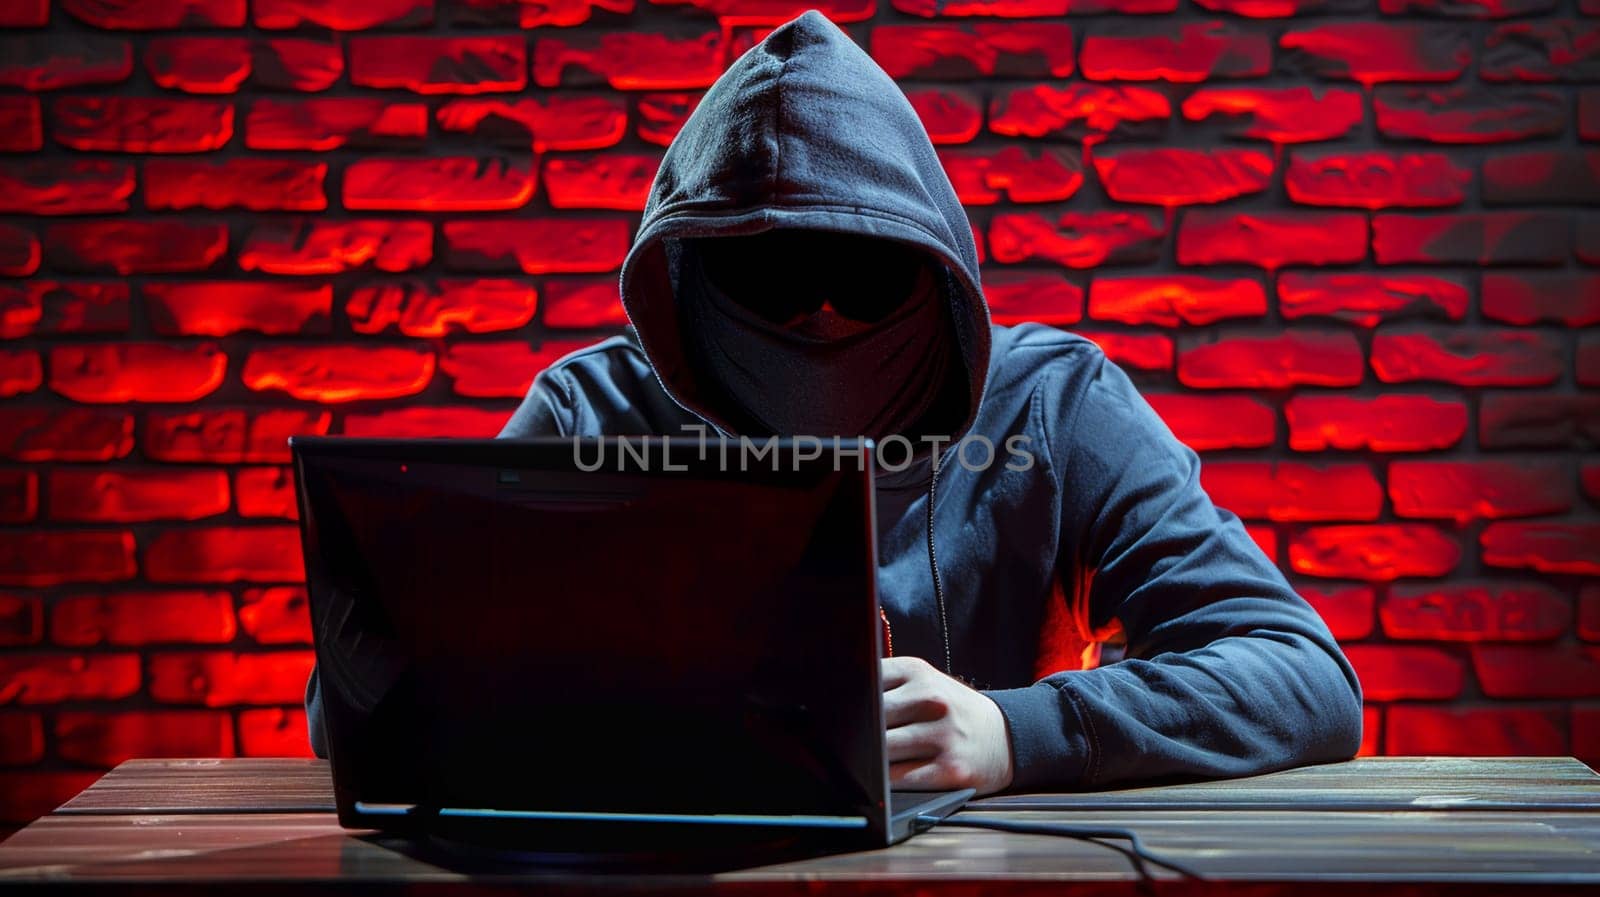 Hooded figure engages in cyber activities using laptop, seated against glowing red brick wall backdrop.